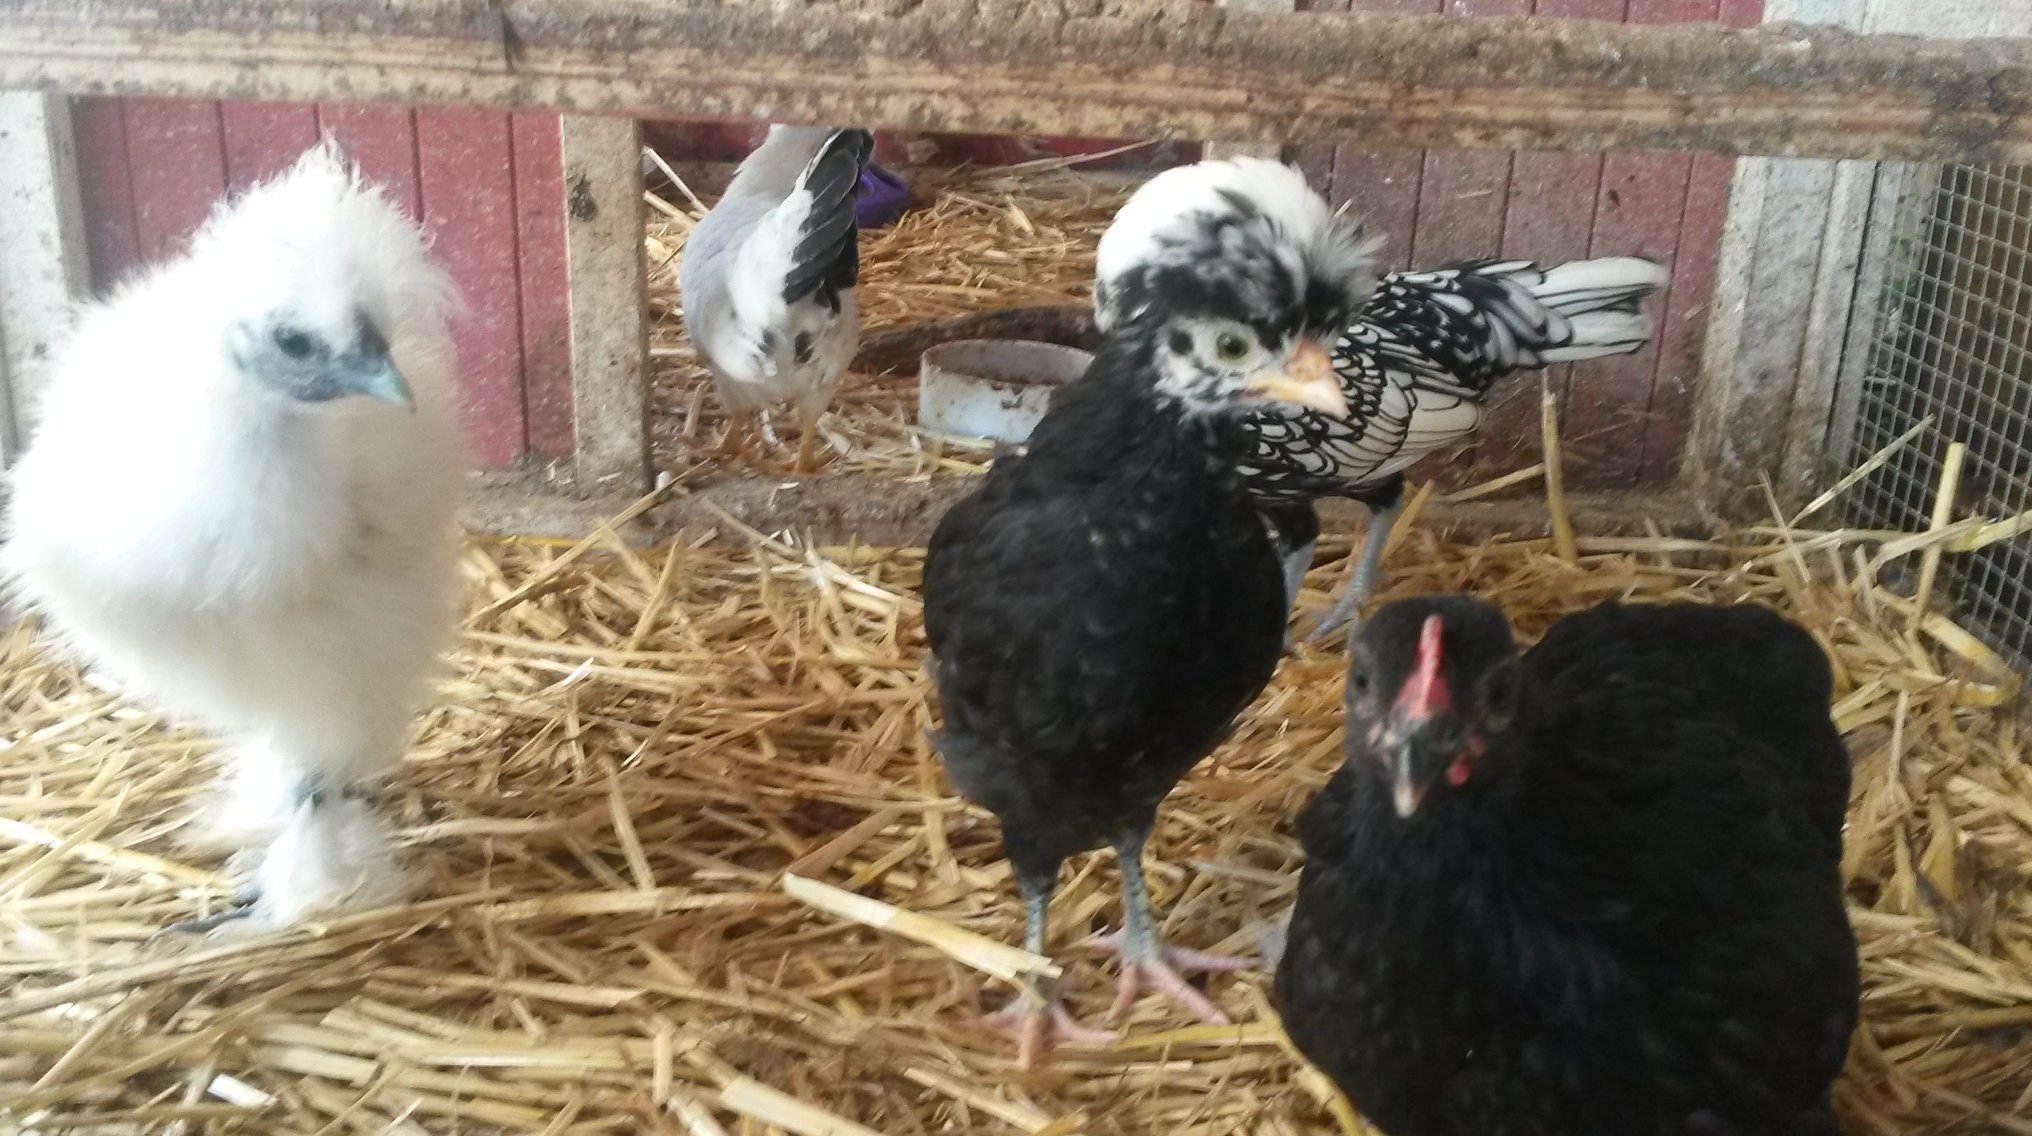 From left to right - Levy - Silkie (we think a hen but not sure now), Peaches, well her butt at least lol...mini bantam hen, Patches hiding back there too.....mini bantam hen, Precious - White crested polish pullet hen.....and Ebony in the front (solid black) mini bantam hen